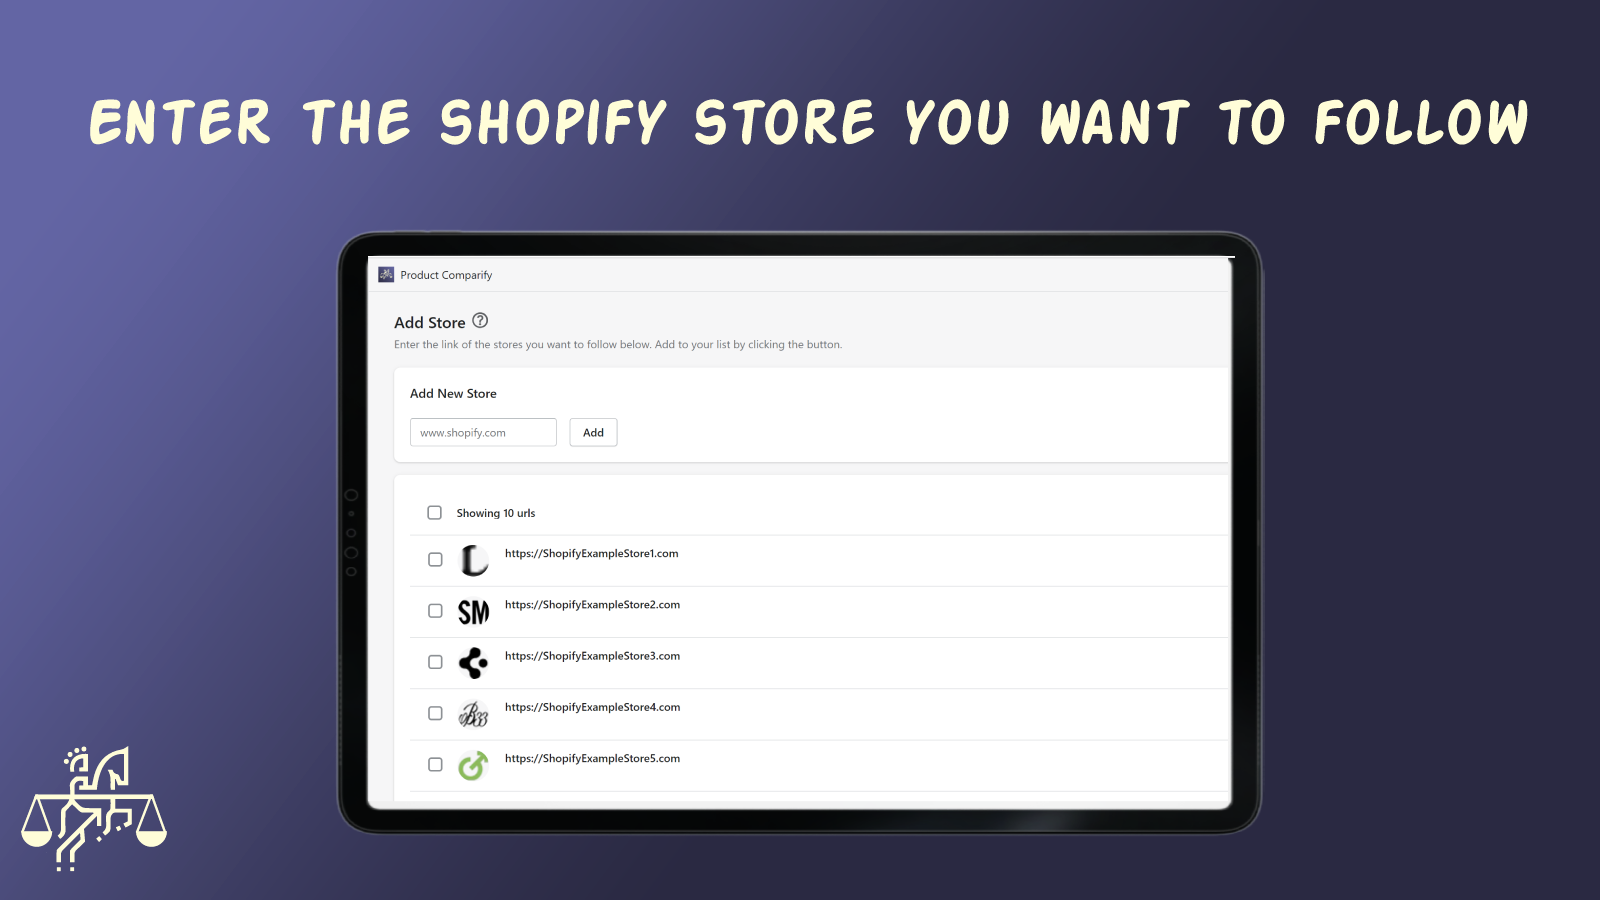 Enter the shopify store you want to follow.